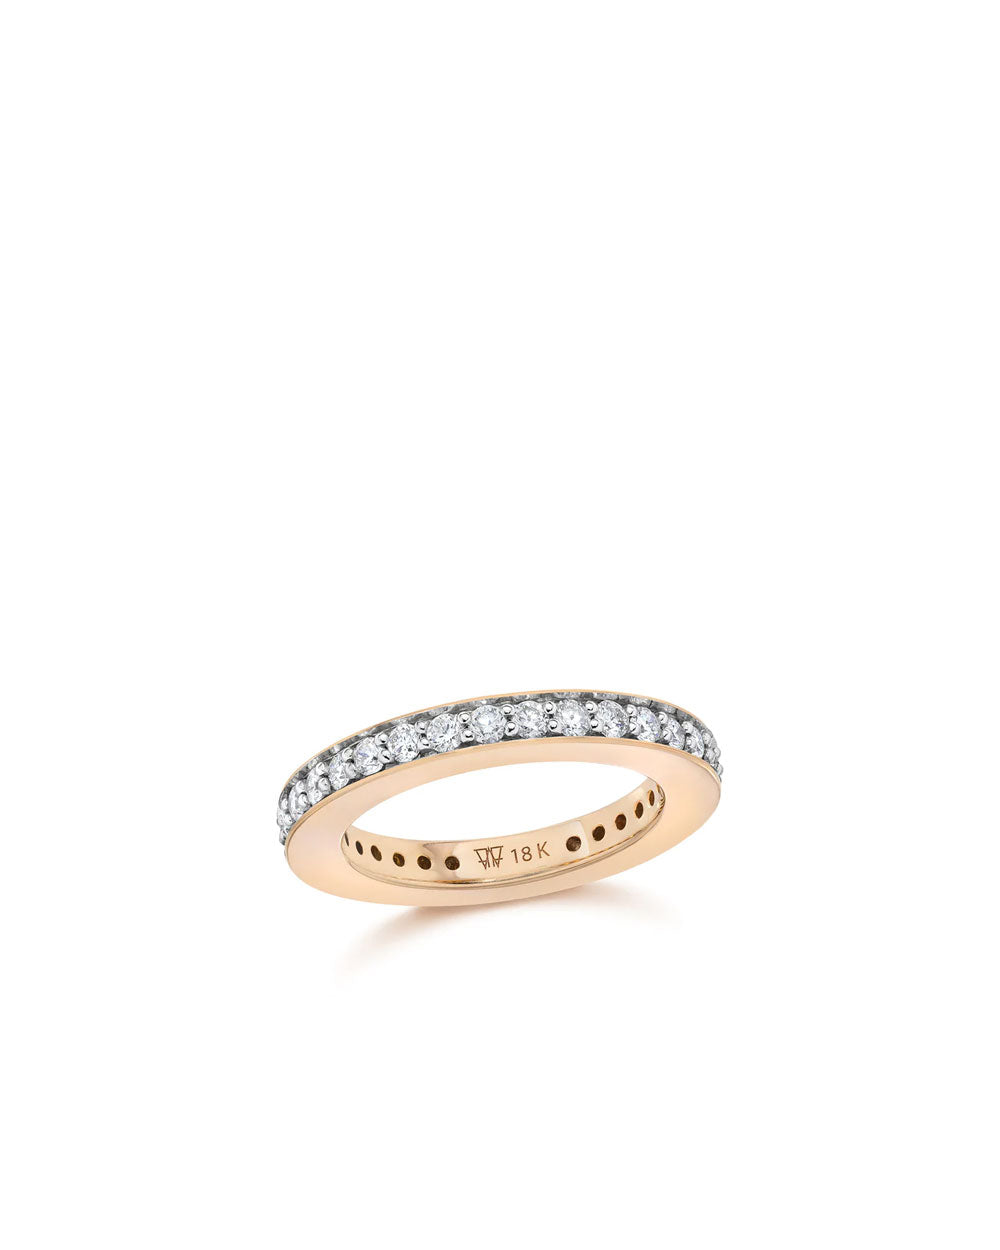 18k Rose Gold 3mm Band with White Diamonds